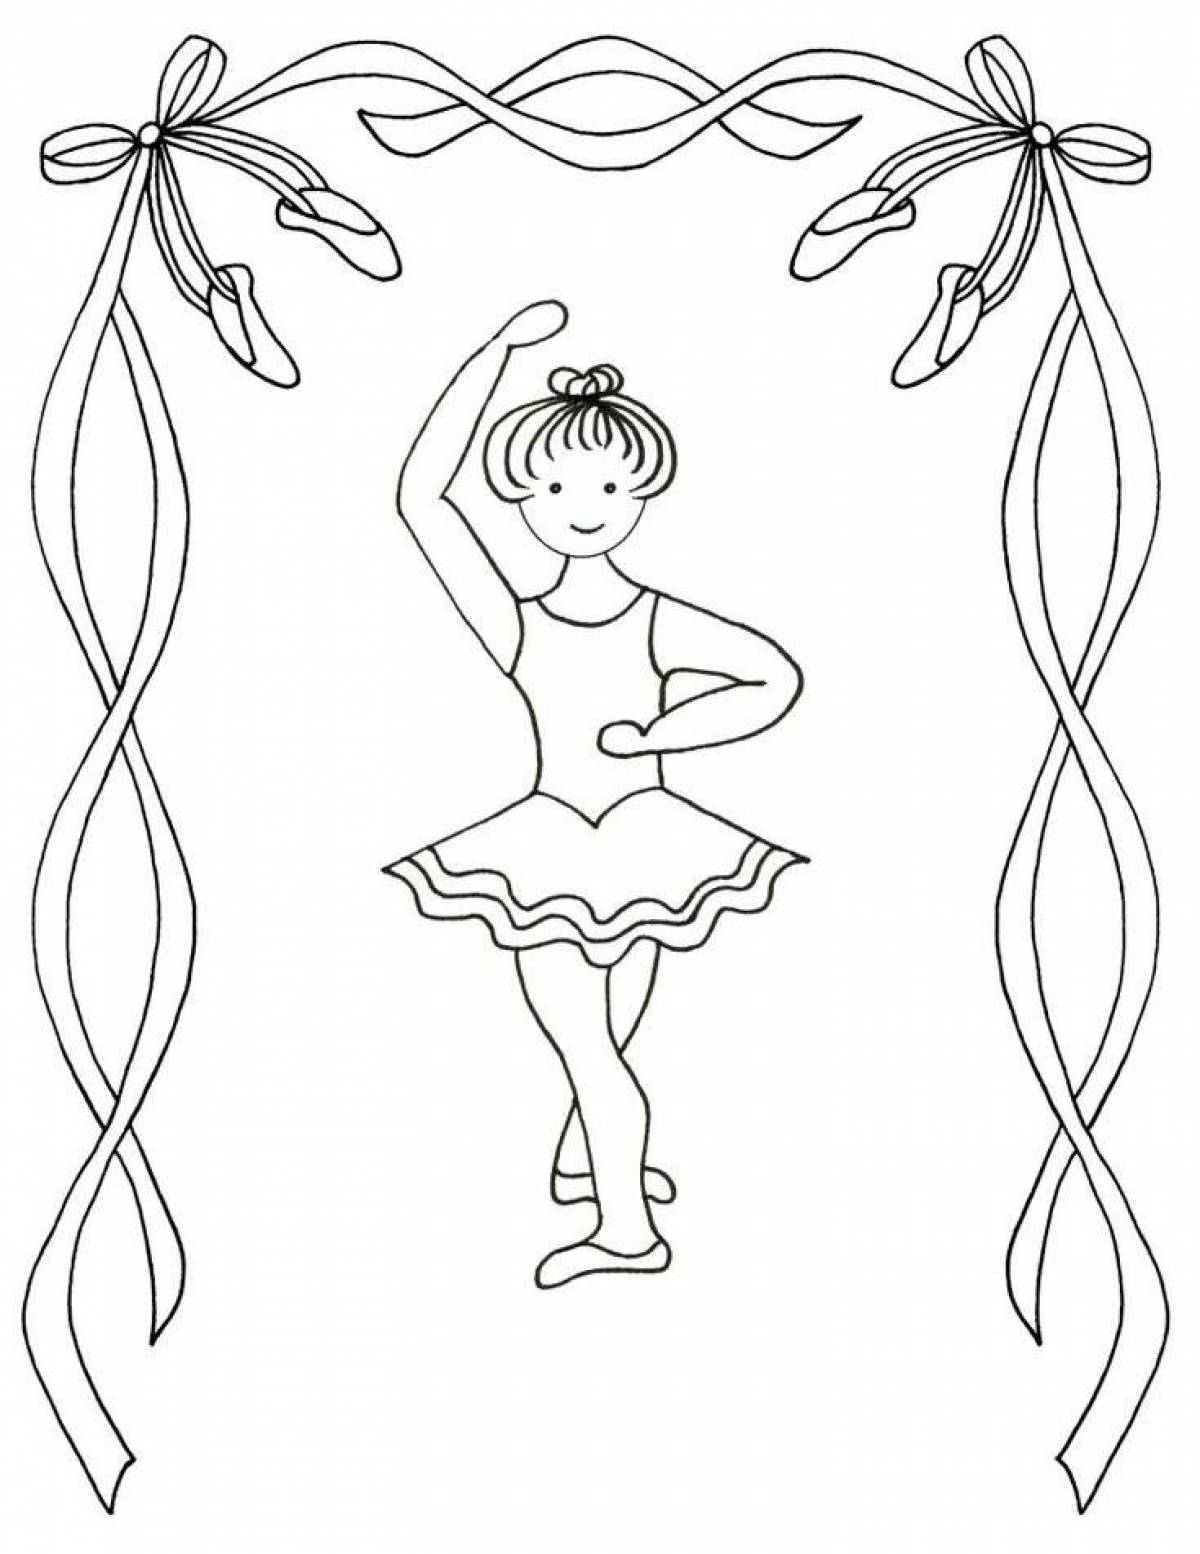 Adorable ballerina coloring pages for kids